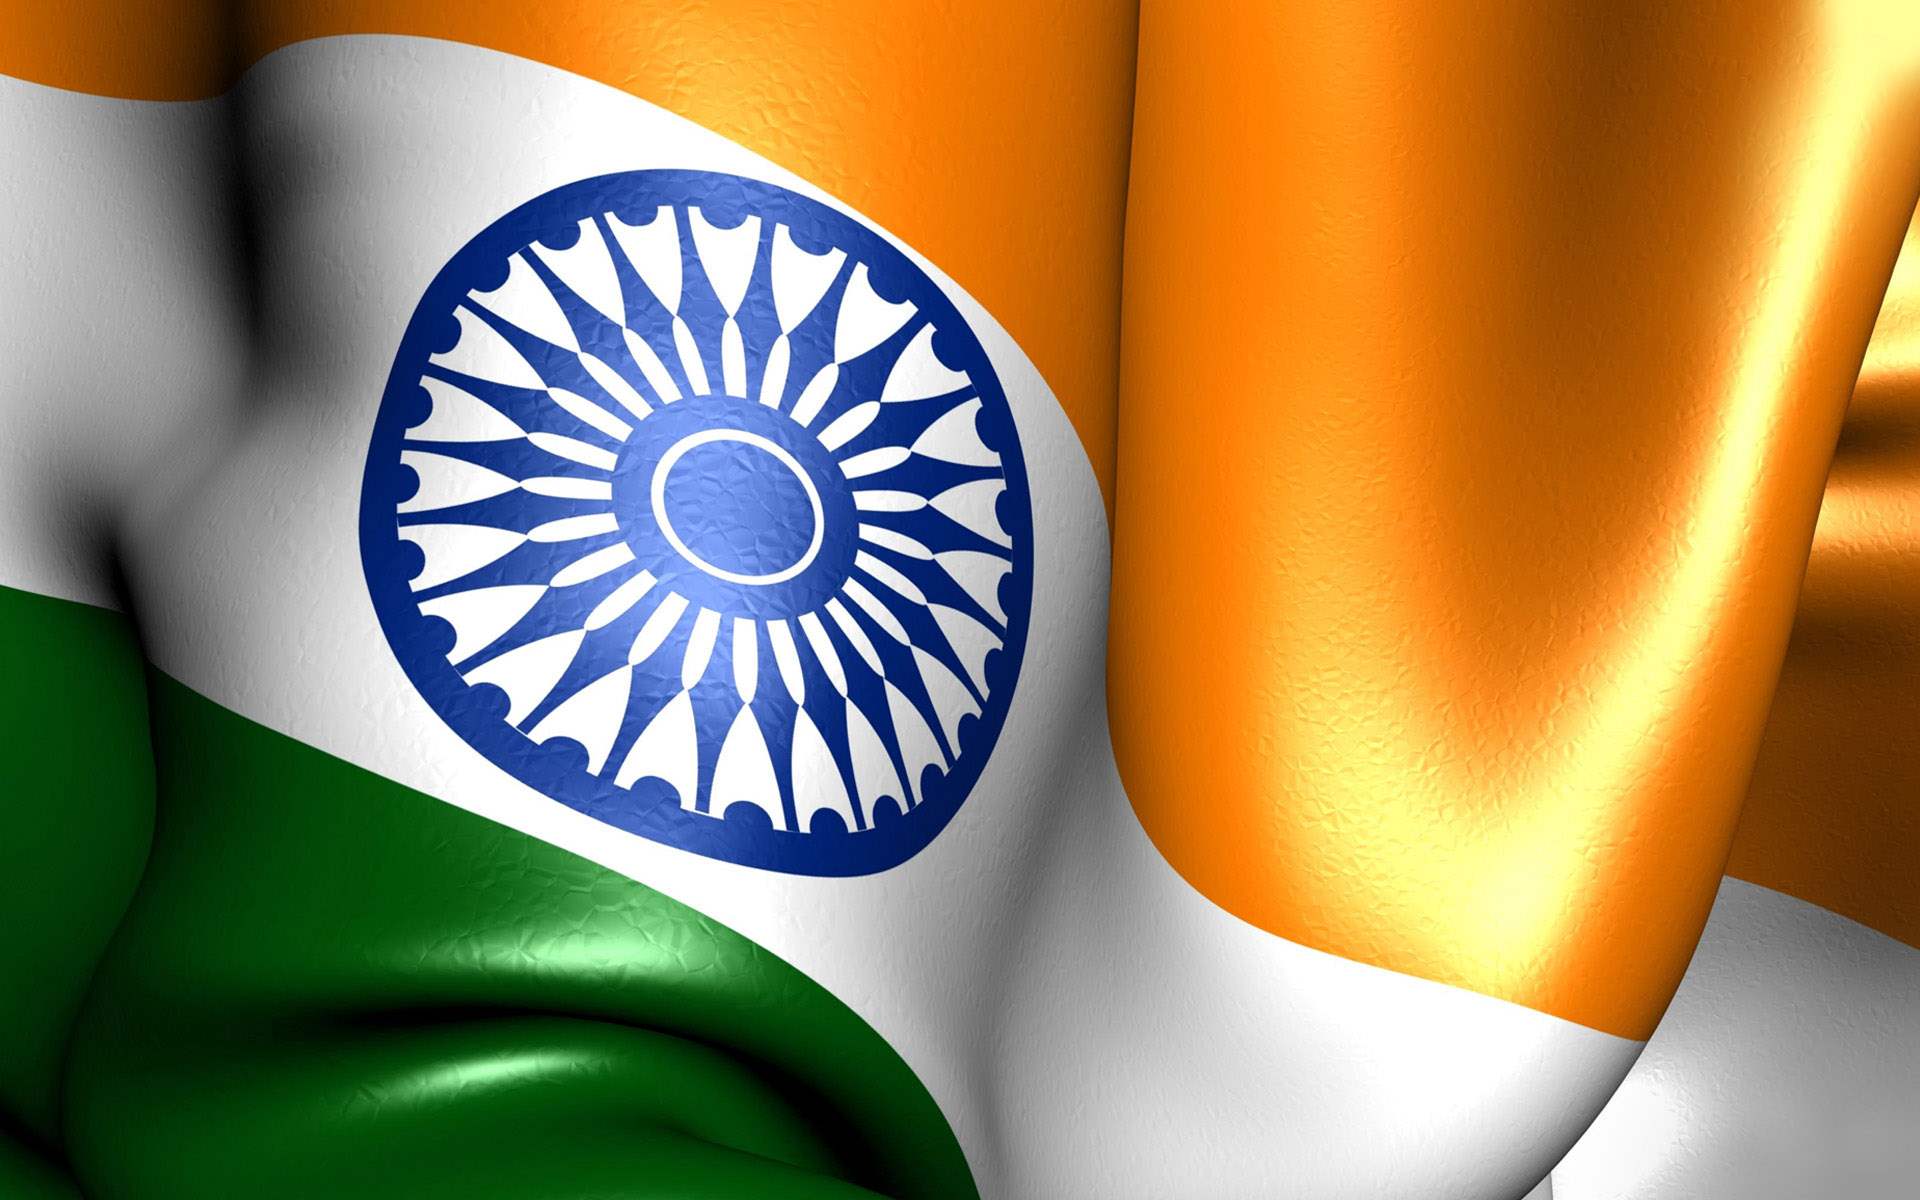  of india independence day hd wallpapers 2015 india independence